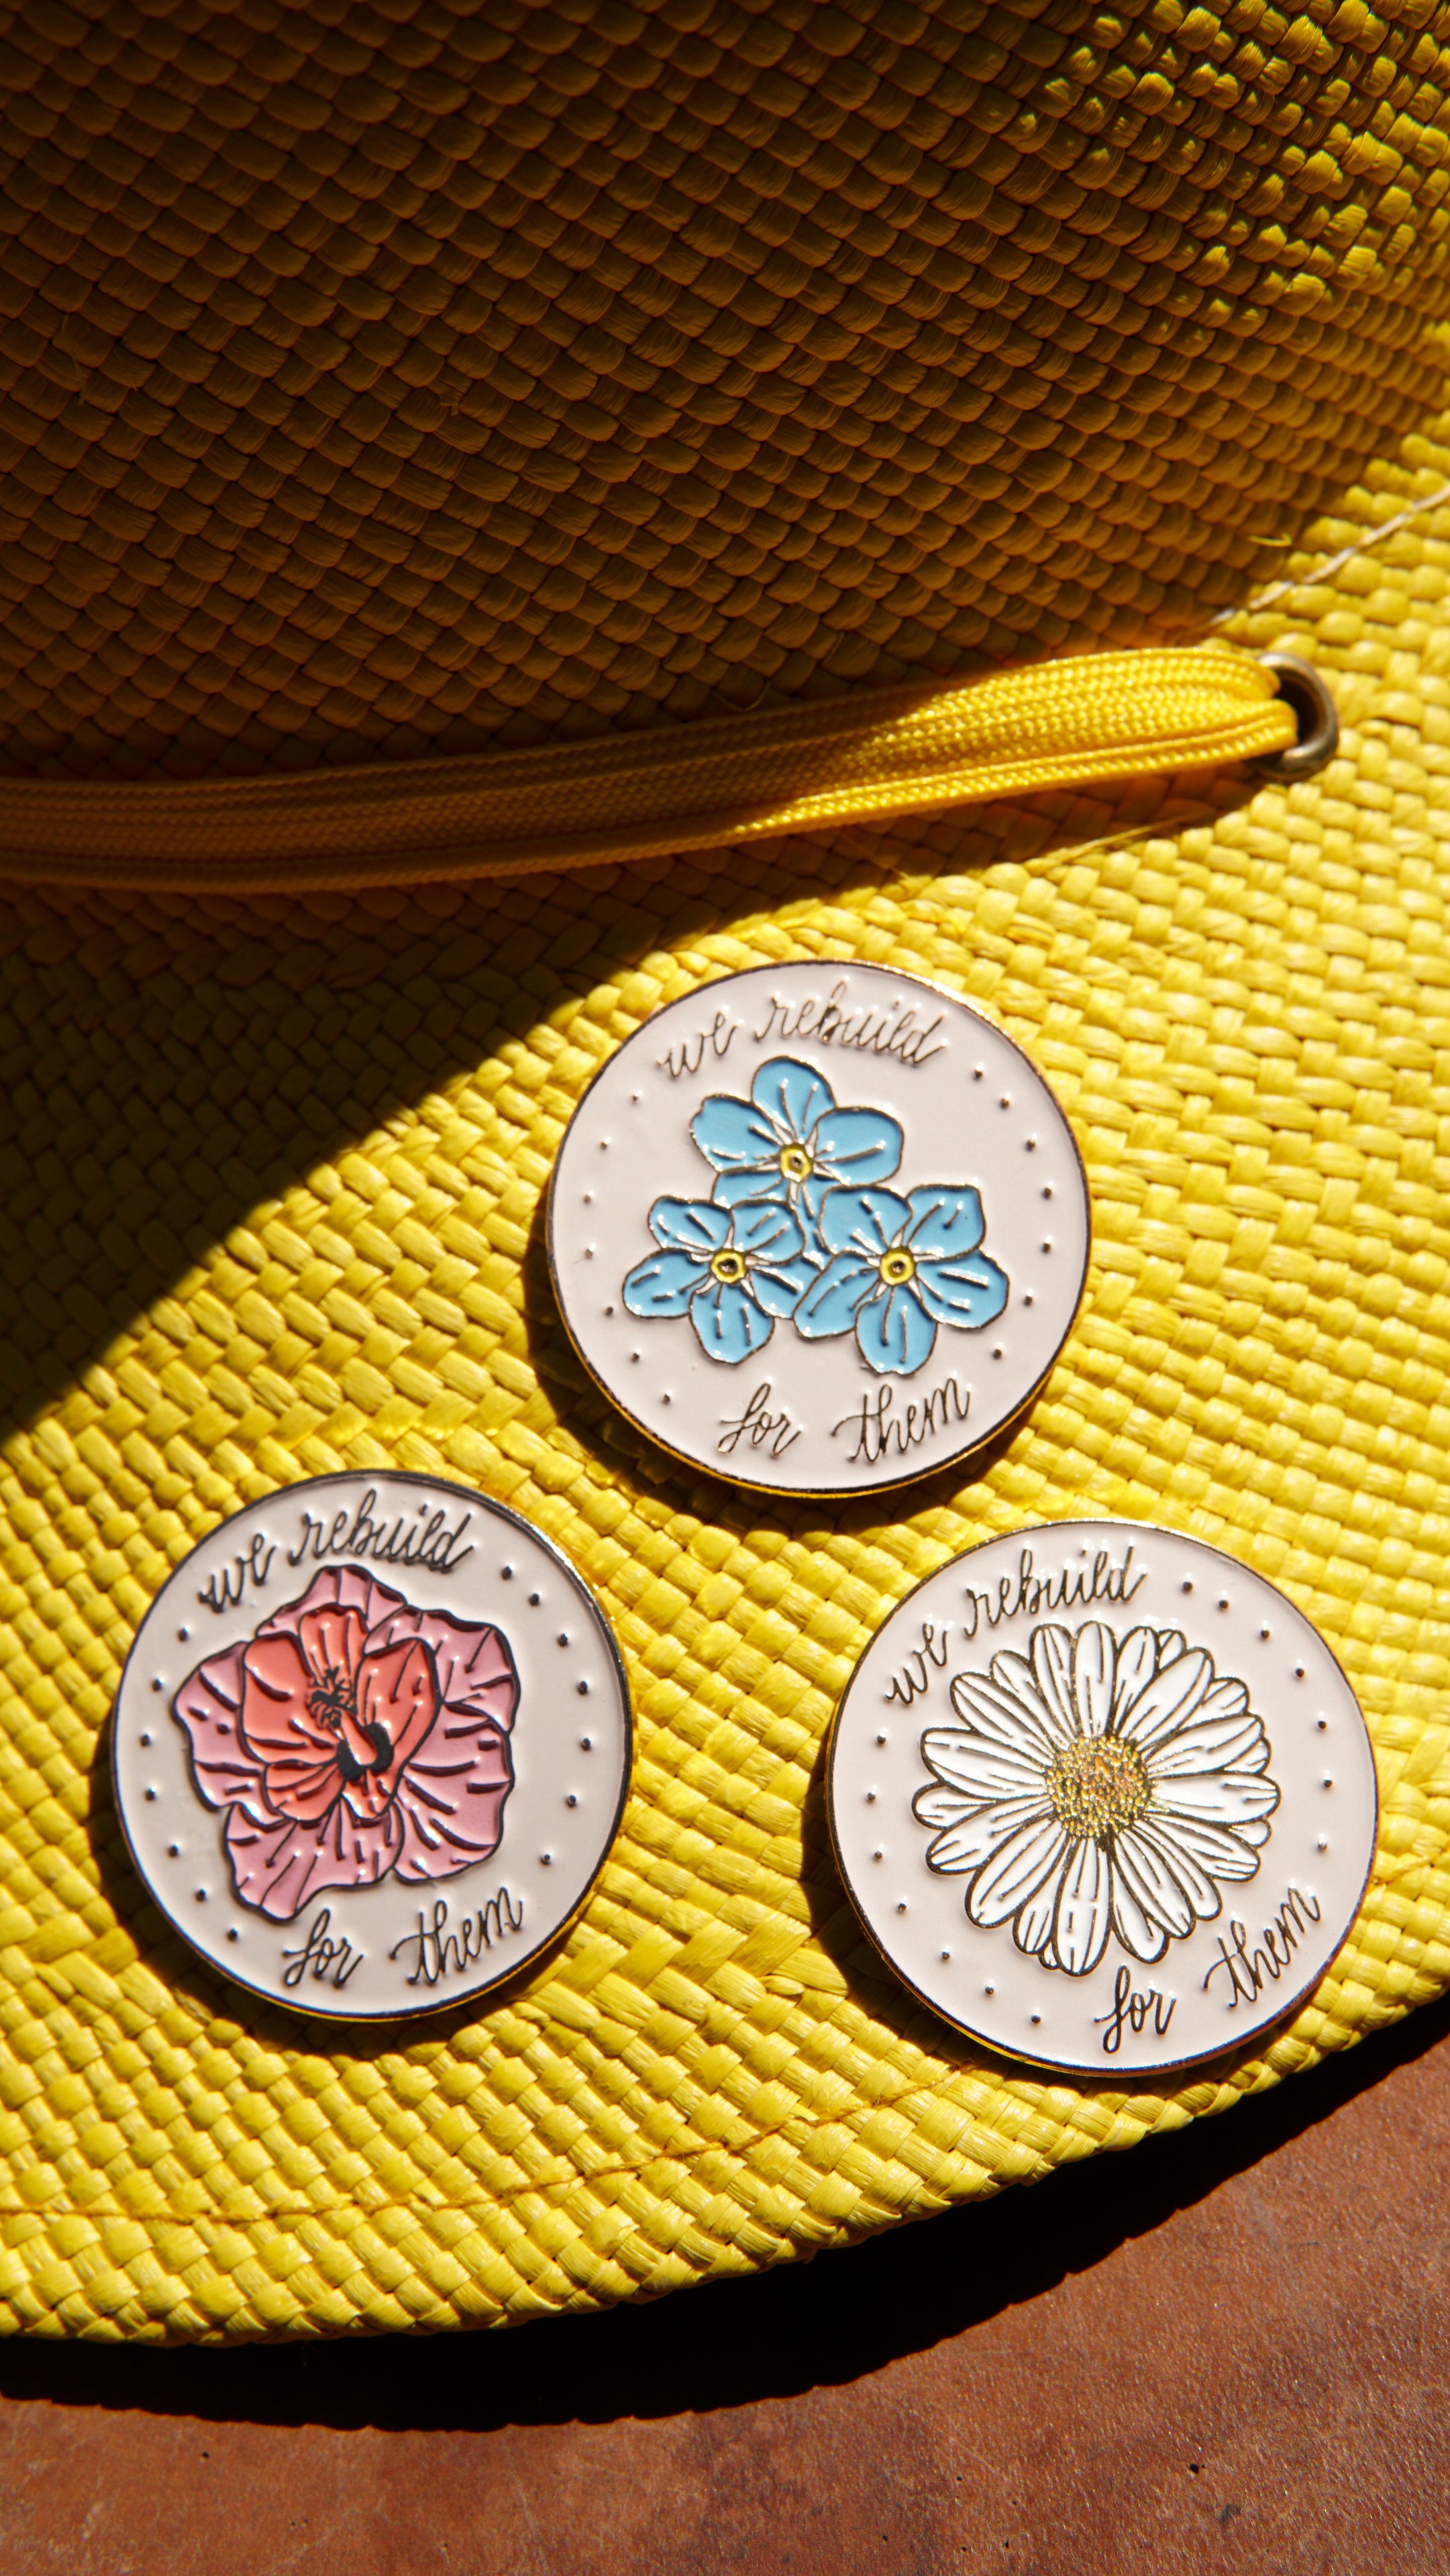 Set of 3 COVID-19 Memorial Pins on a yellow hat